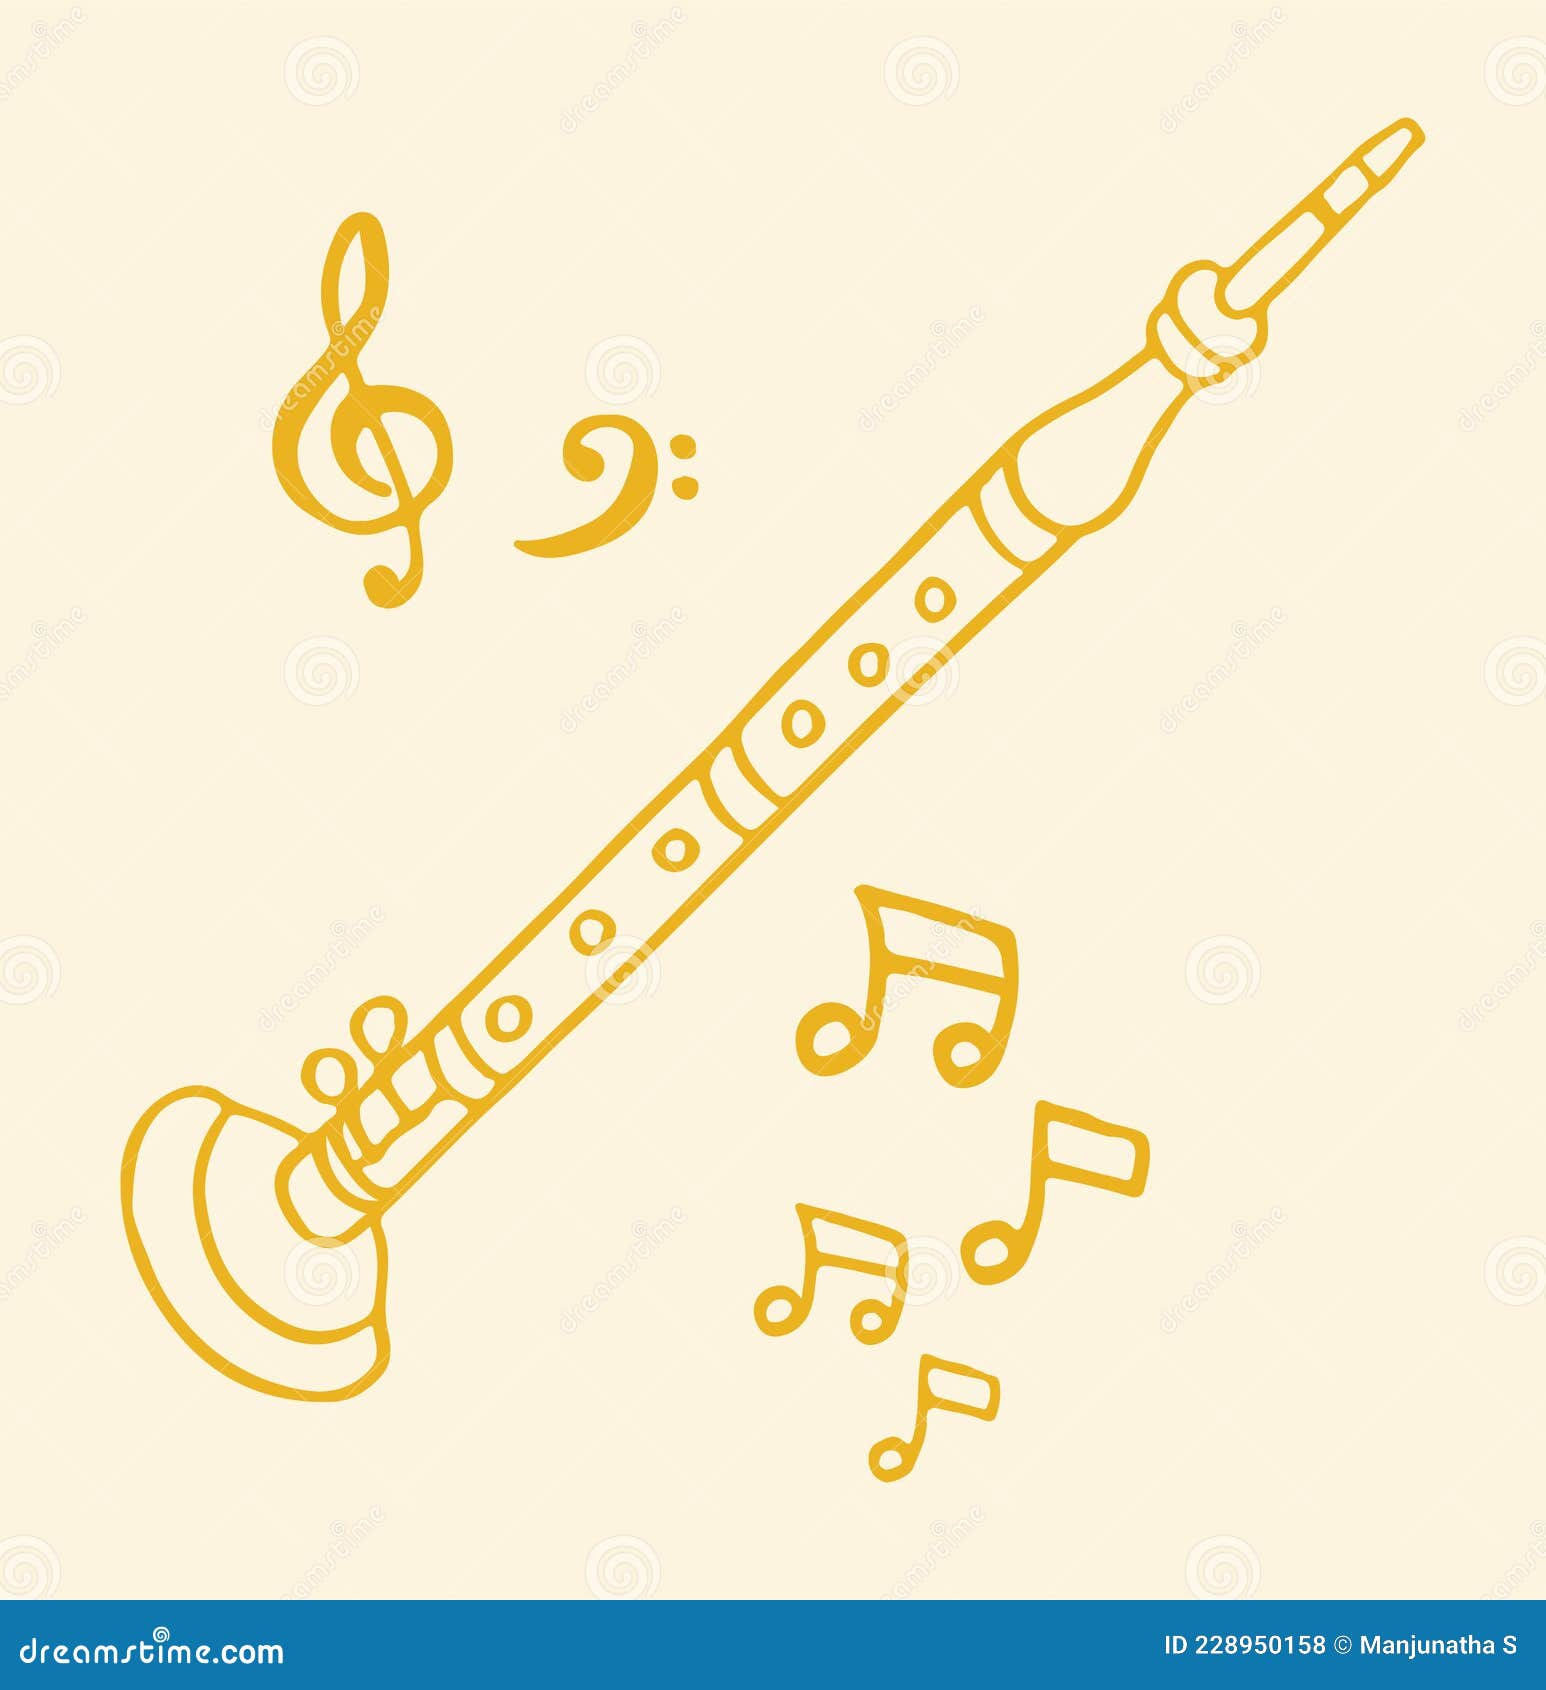 Saxaphone Drawing Shehnai  Transparent Background Saxophone Clipart  Transparent PNG  2400x1950  Free Download on NicePNG